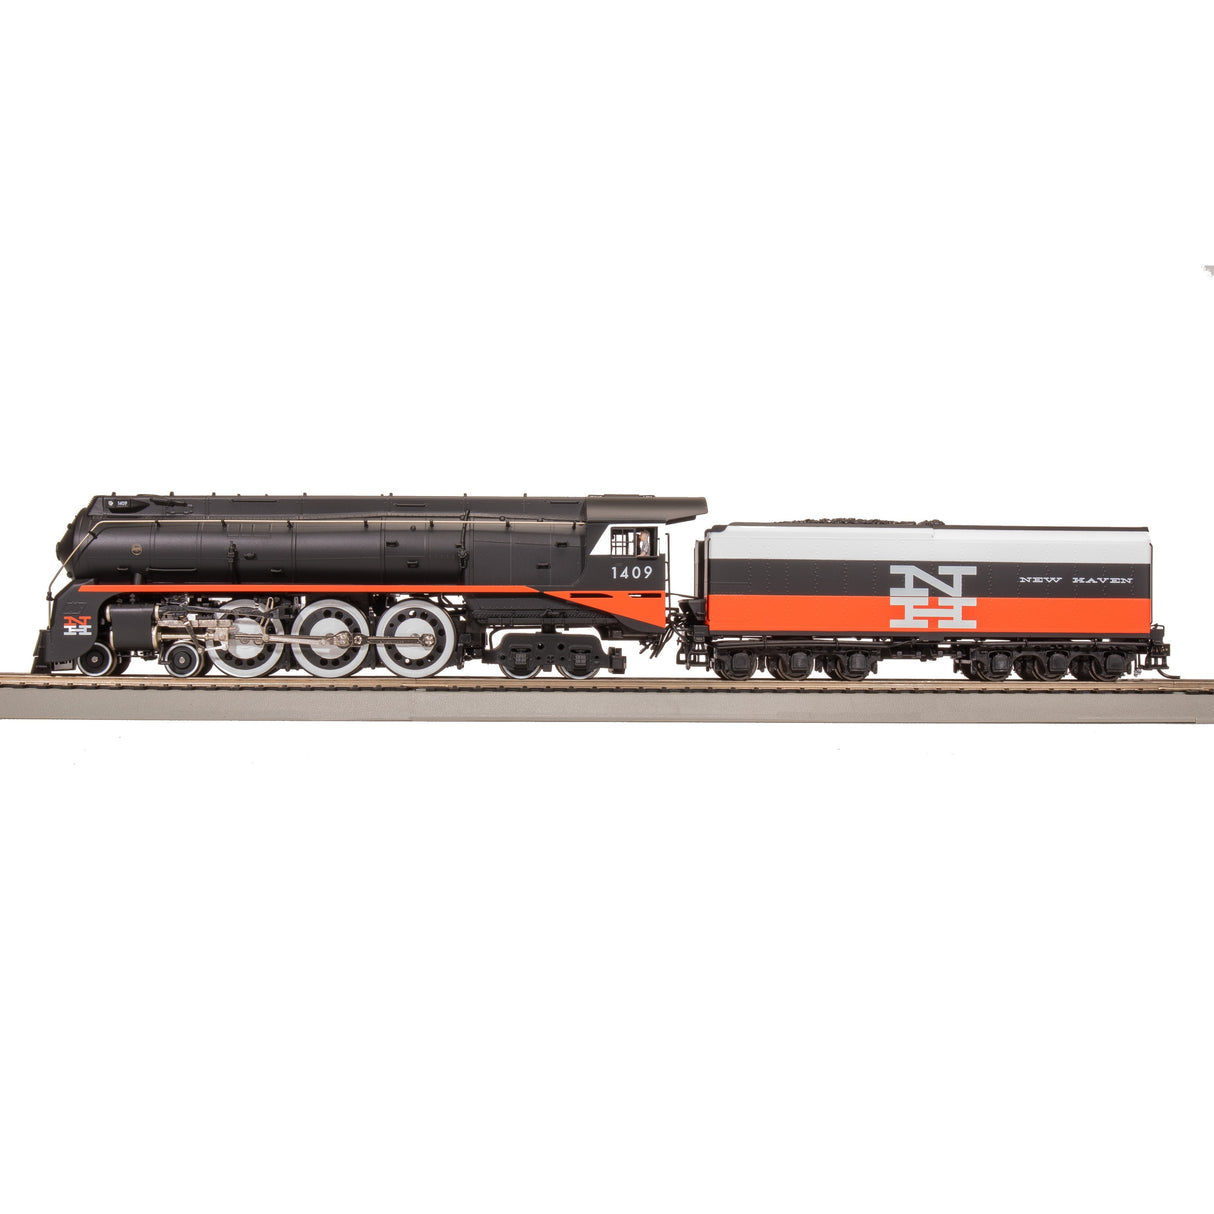 Broadway Limited HO Scale HY NH I-5 4-6-4 Steam Locomotive #1409/McGinnis Fantasy/DCC Rea